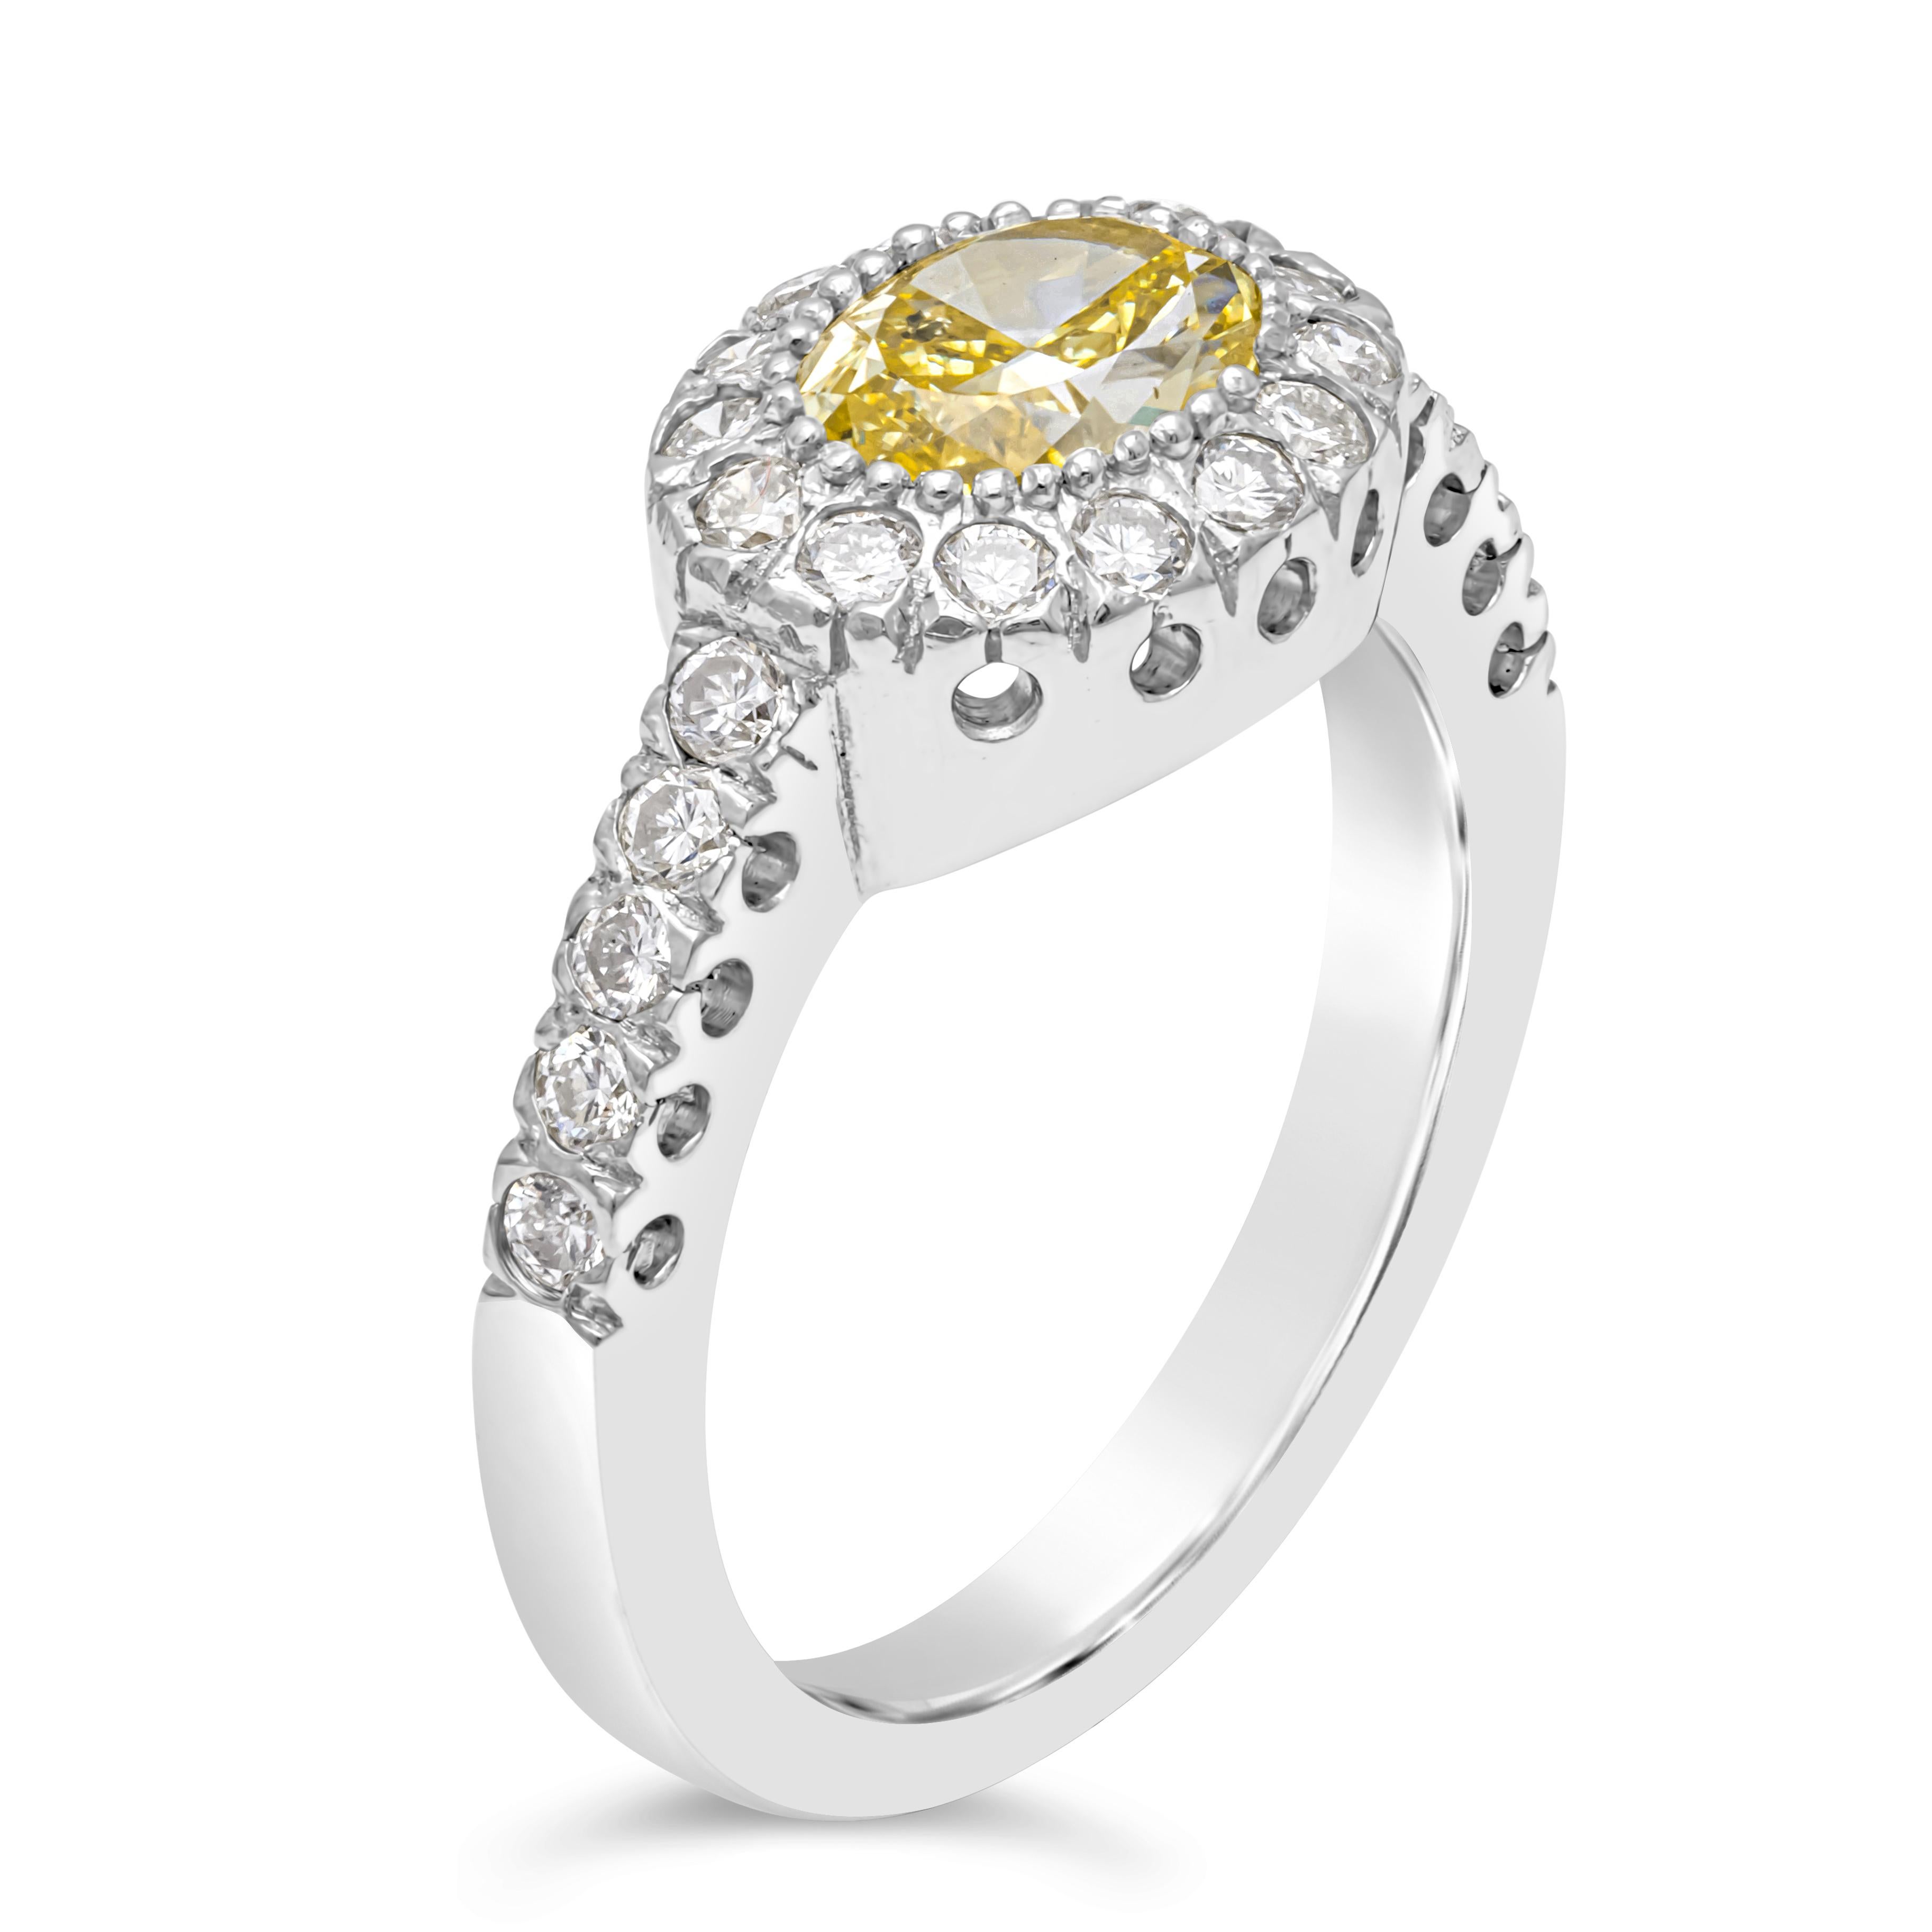 A well crafted engagement ring showcasing a color rich 1.03 carats oval cut fancy yellow diamond GIA certified. Center stone is accented by 24 brilliant diamonds. Set in a half eternity pave setting made in platinum. Accent diamonds weigh 0.36